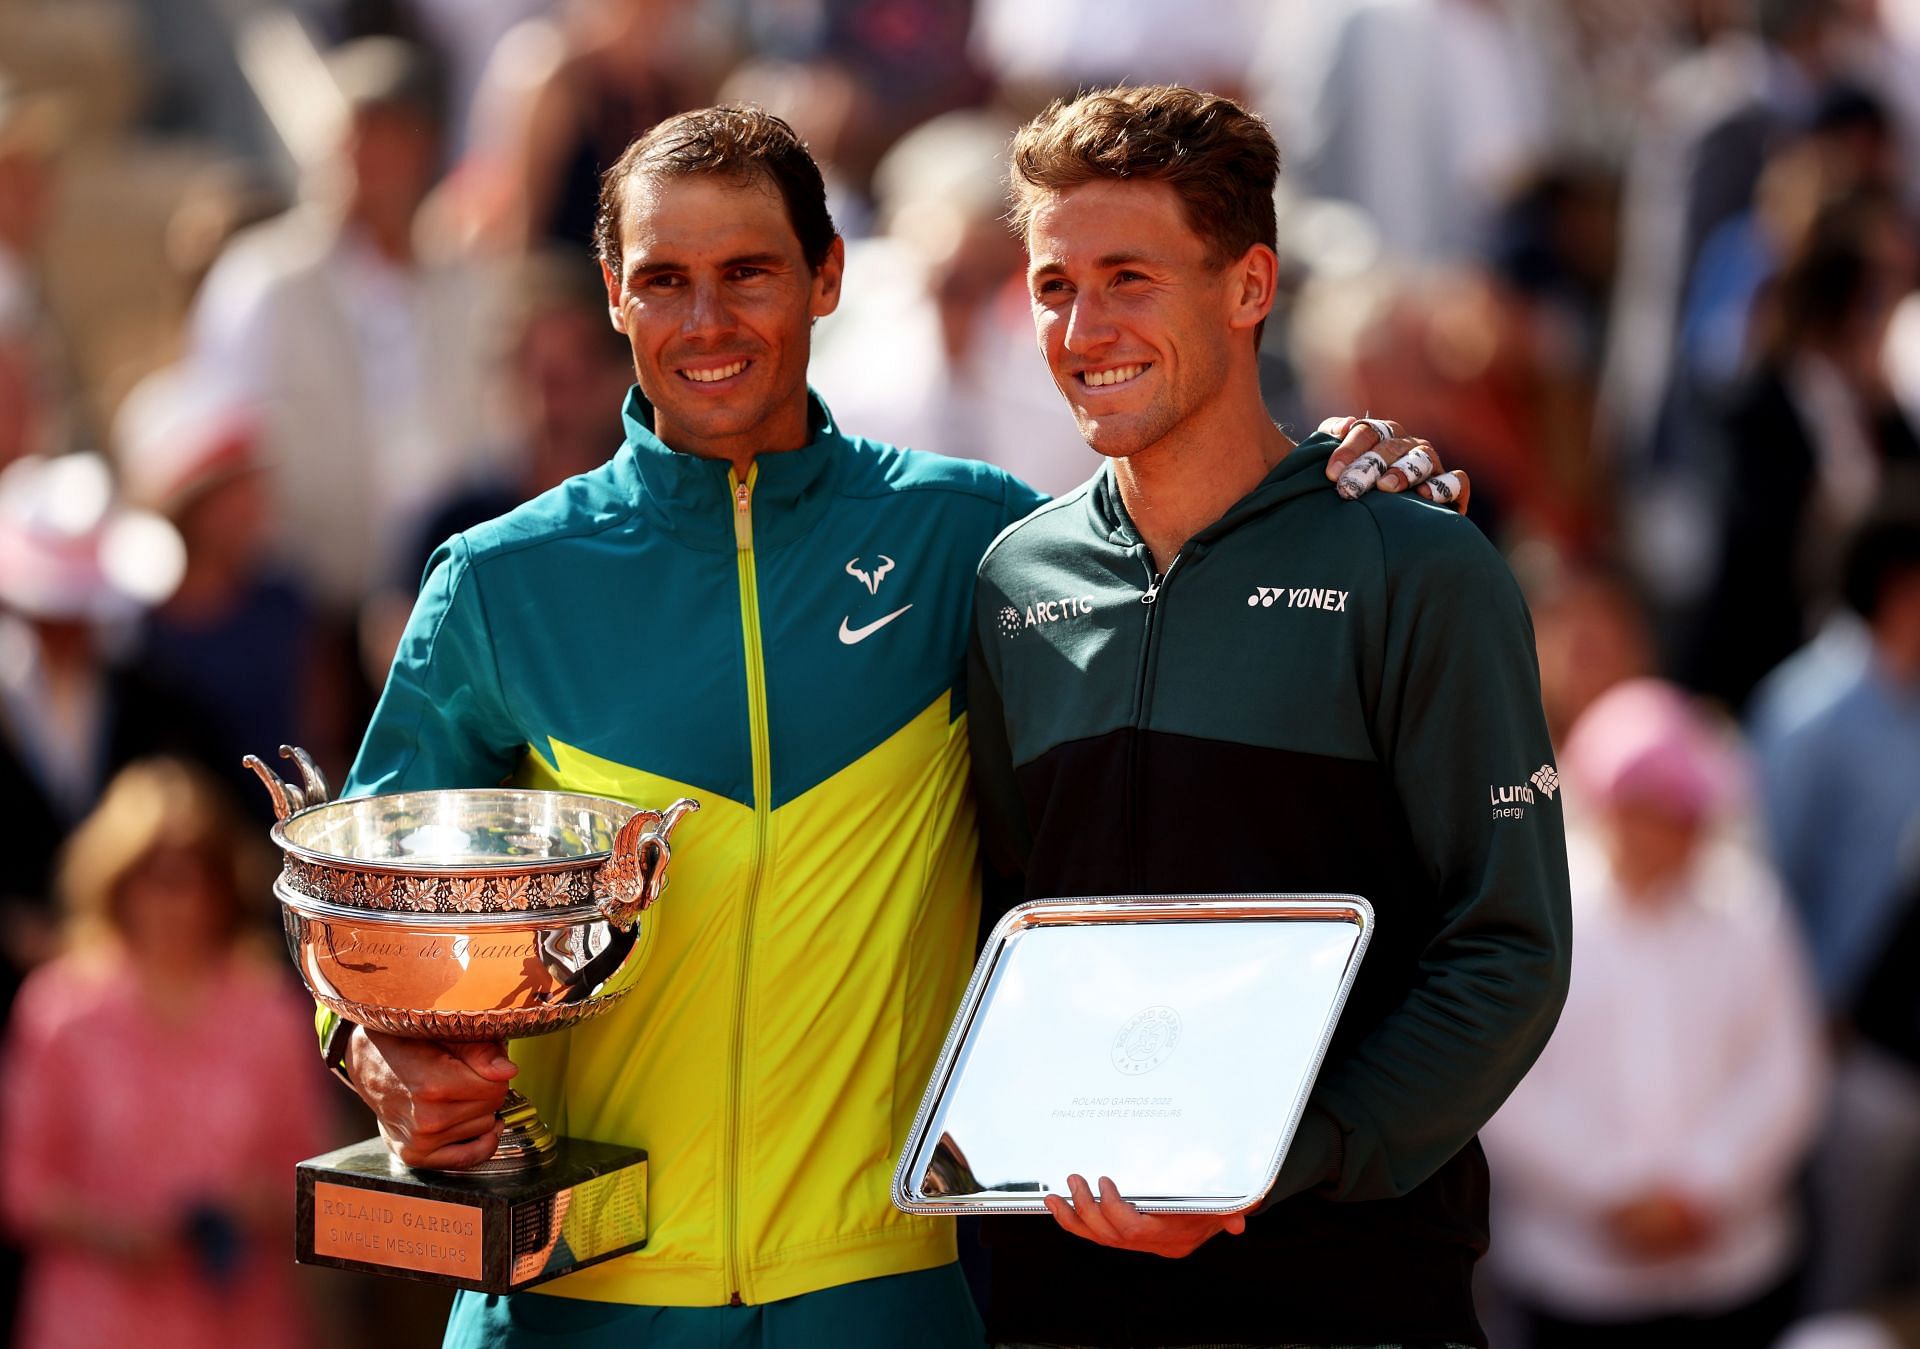 Rafael Nadal (left) and Casper Ruud (right) during the 2022 Roland Garros trophy ceremony